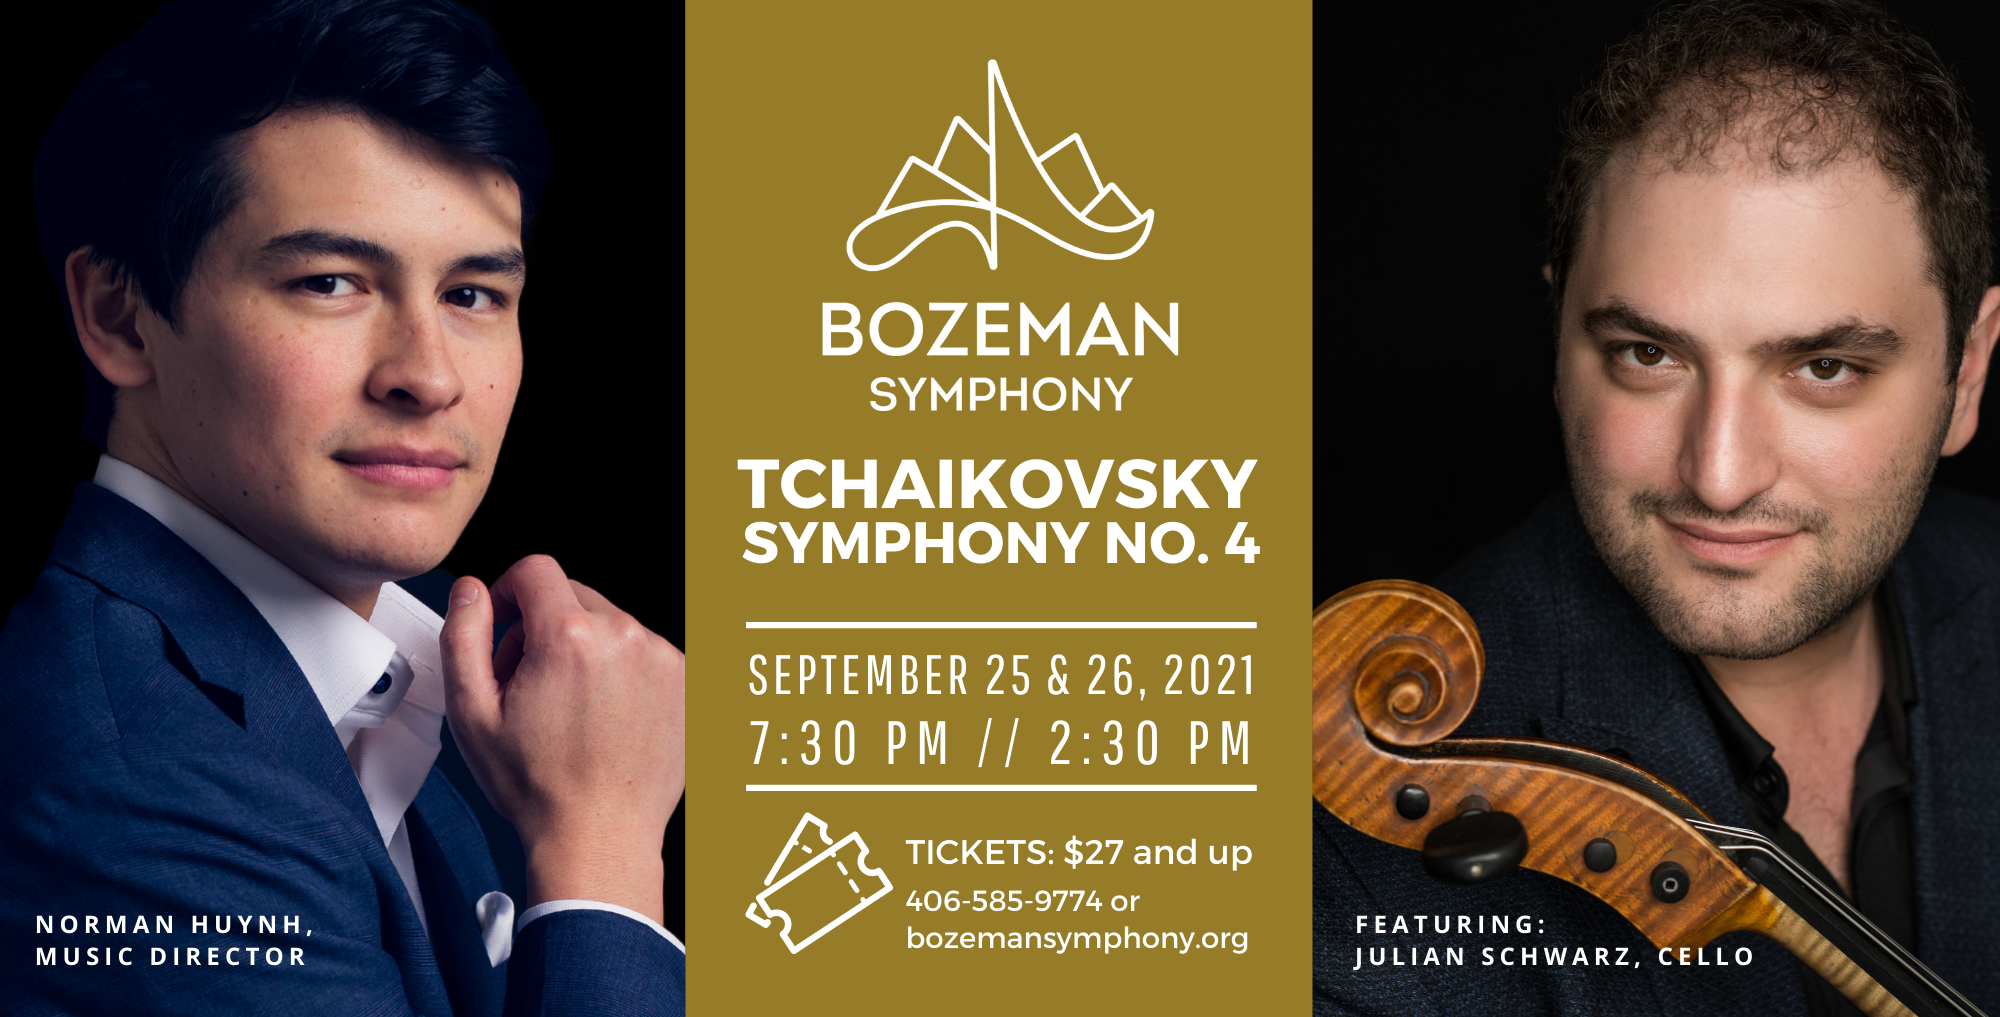 Bozeman Symphony returns to Concert Hall with inperson & virtual